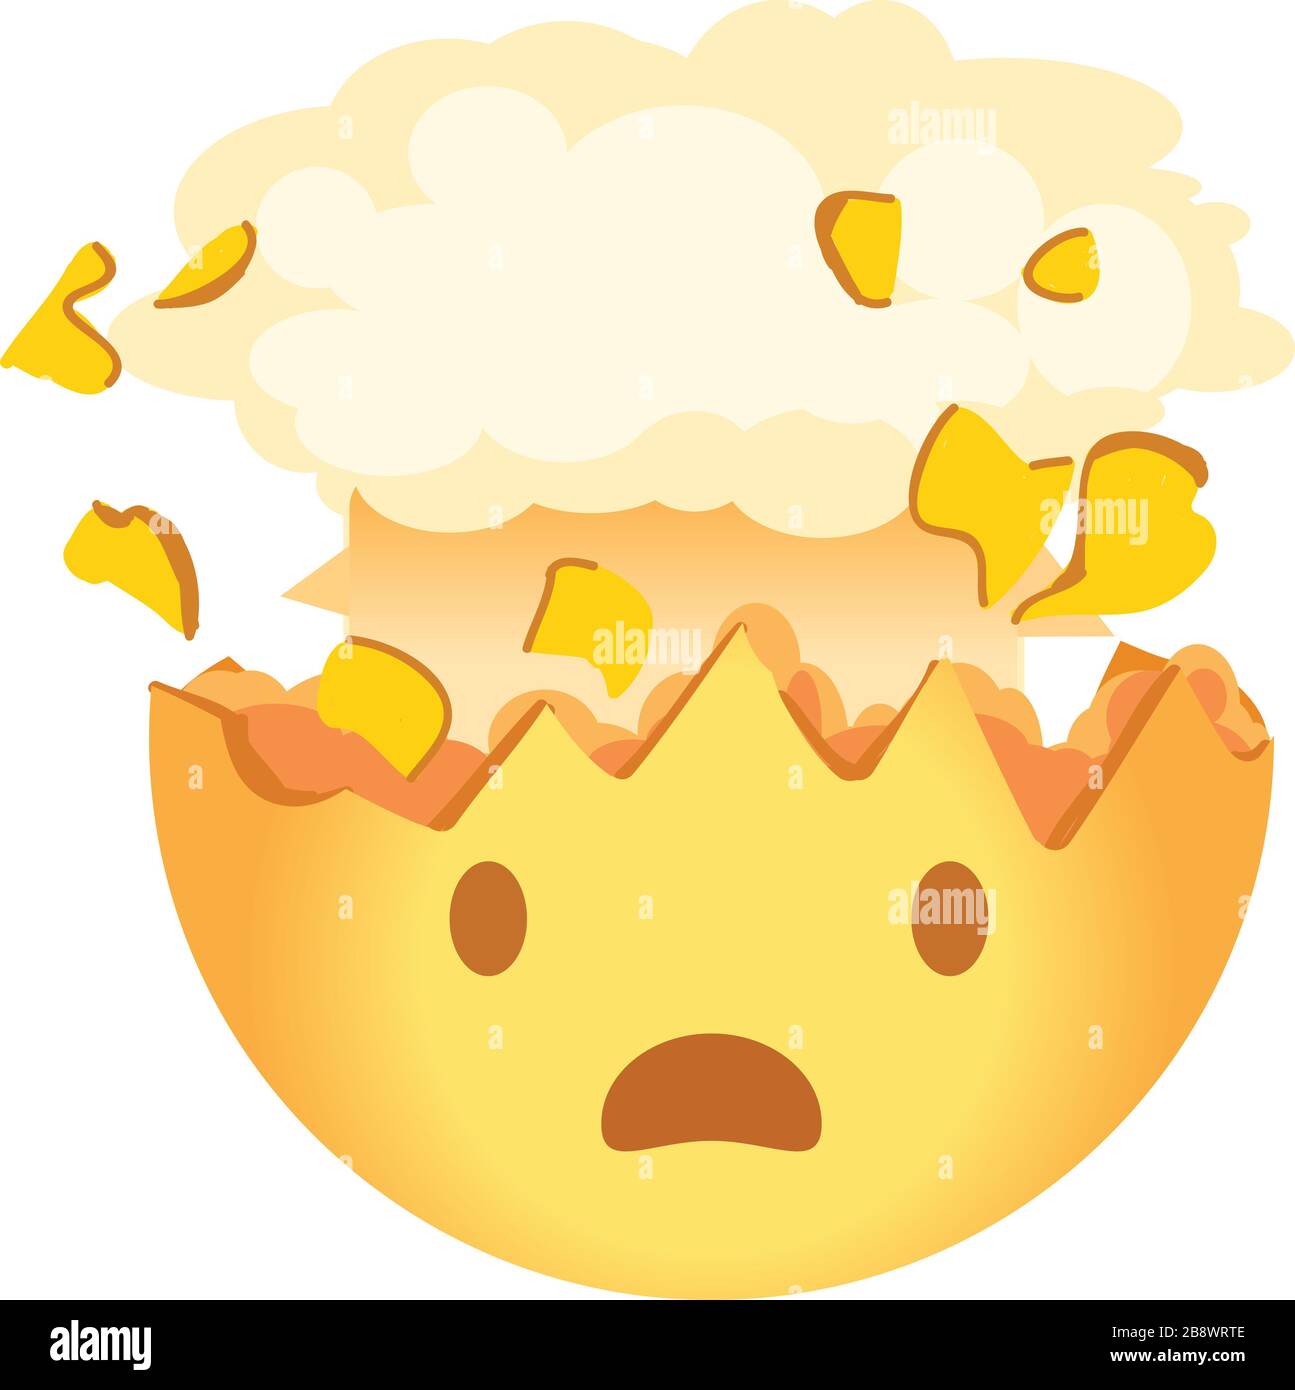 Shocked emoji. Exploding head emoticon. A yellow face with an open mouth and the top of its head exploding in the shape of a brain-like mushroom cloud Stock Photo